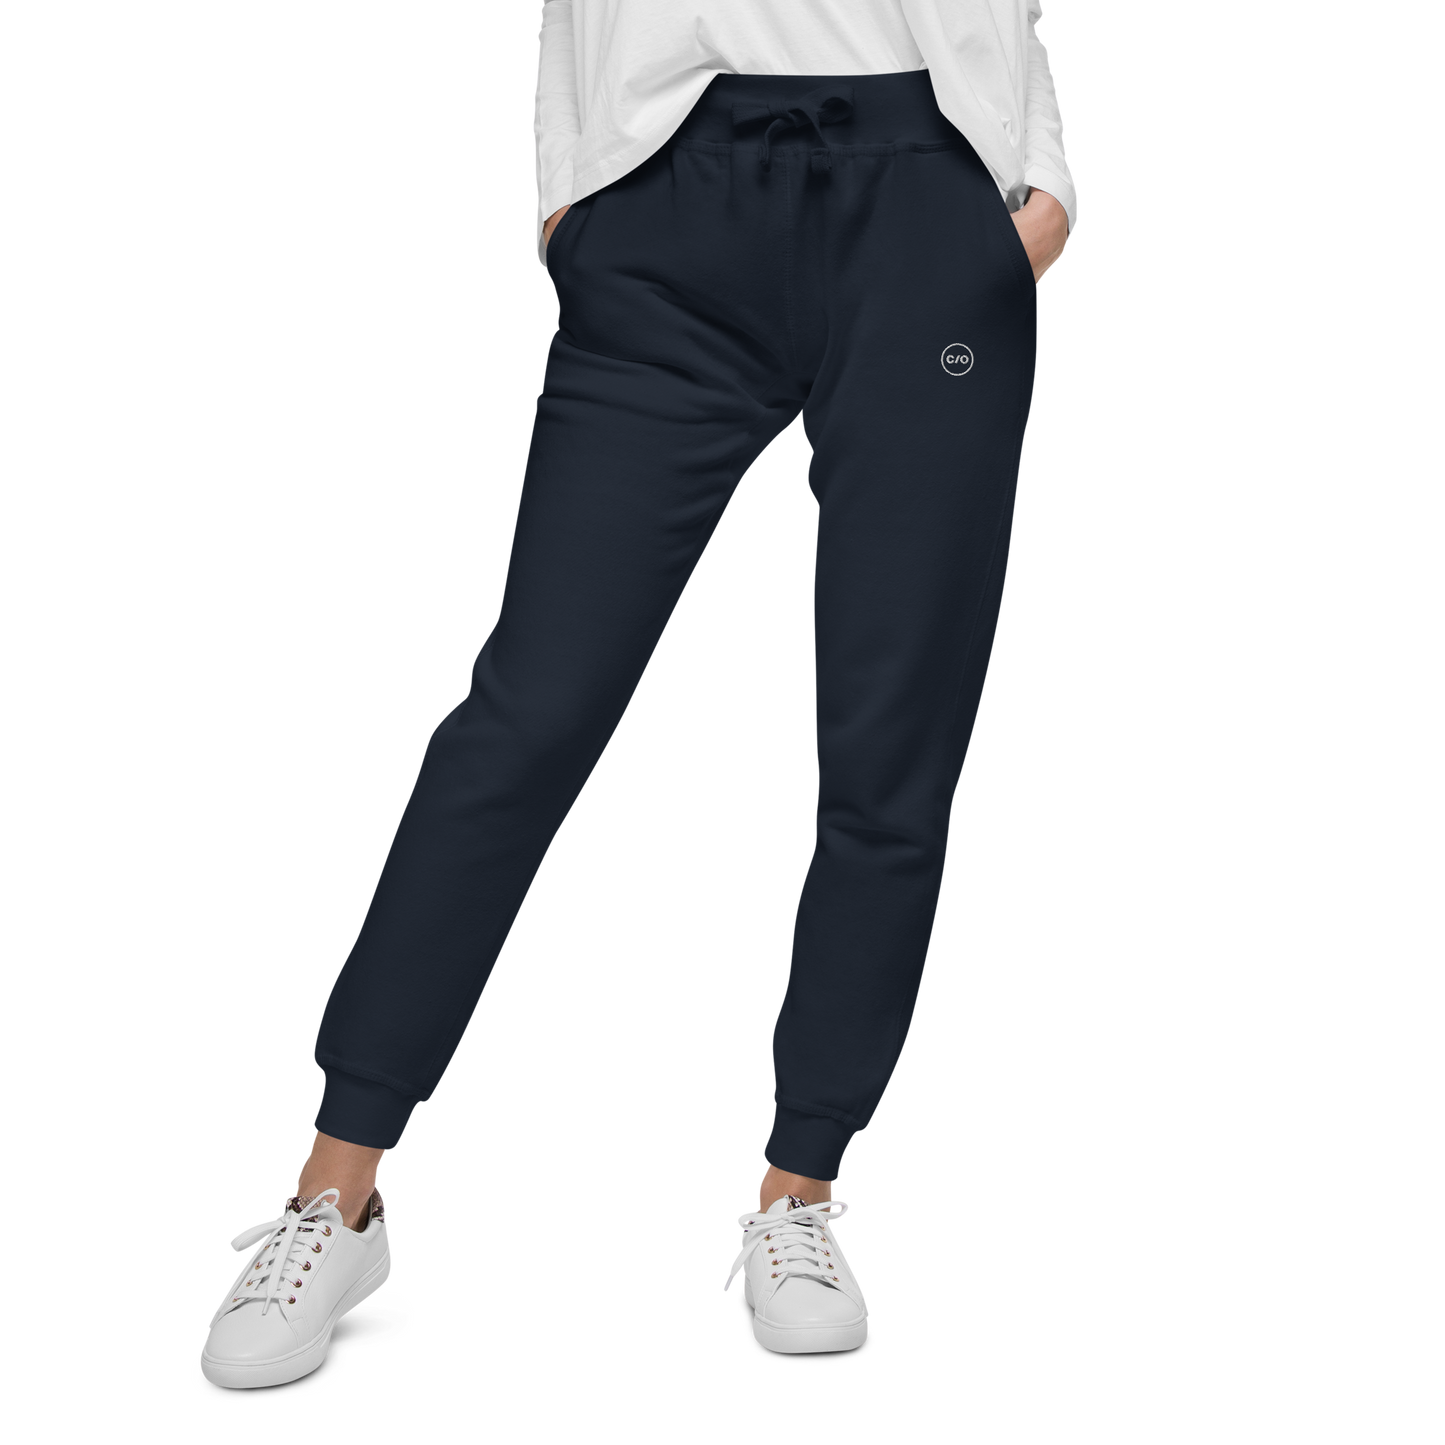 Neue Supply Co. Women's Performance Jogger in Navy Blue